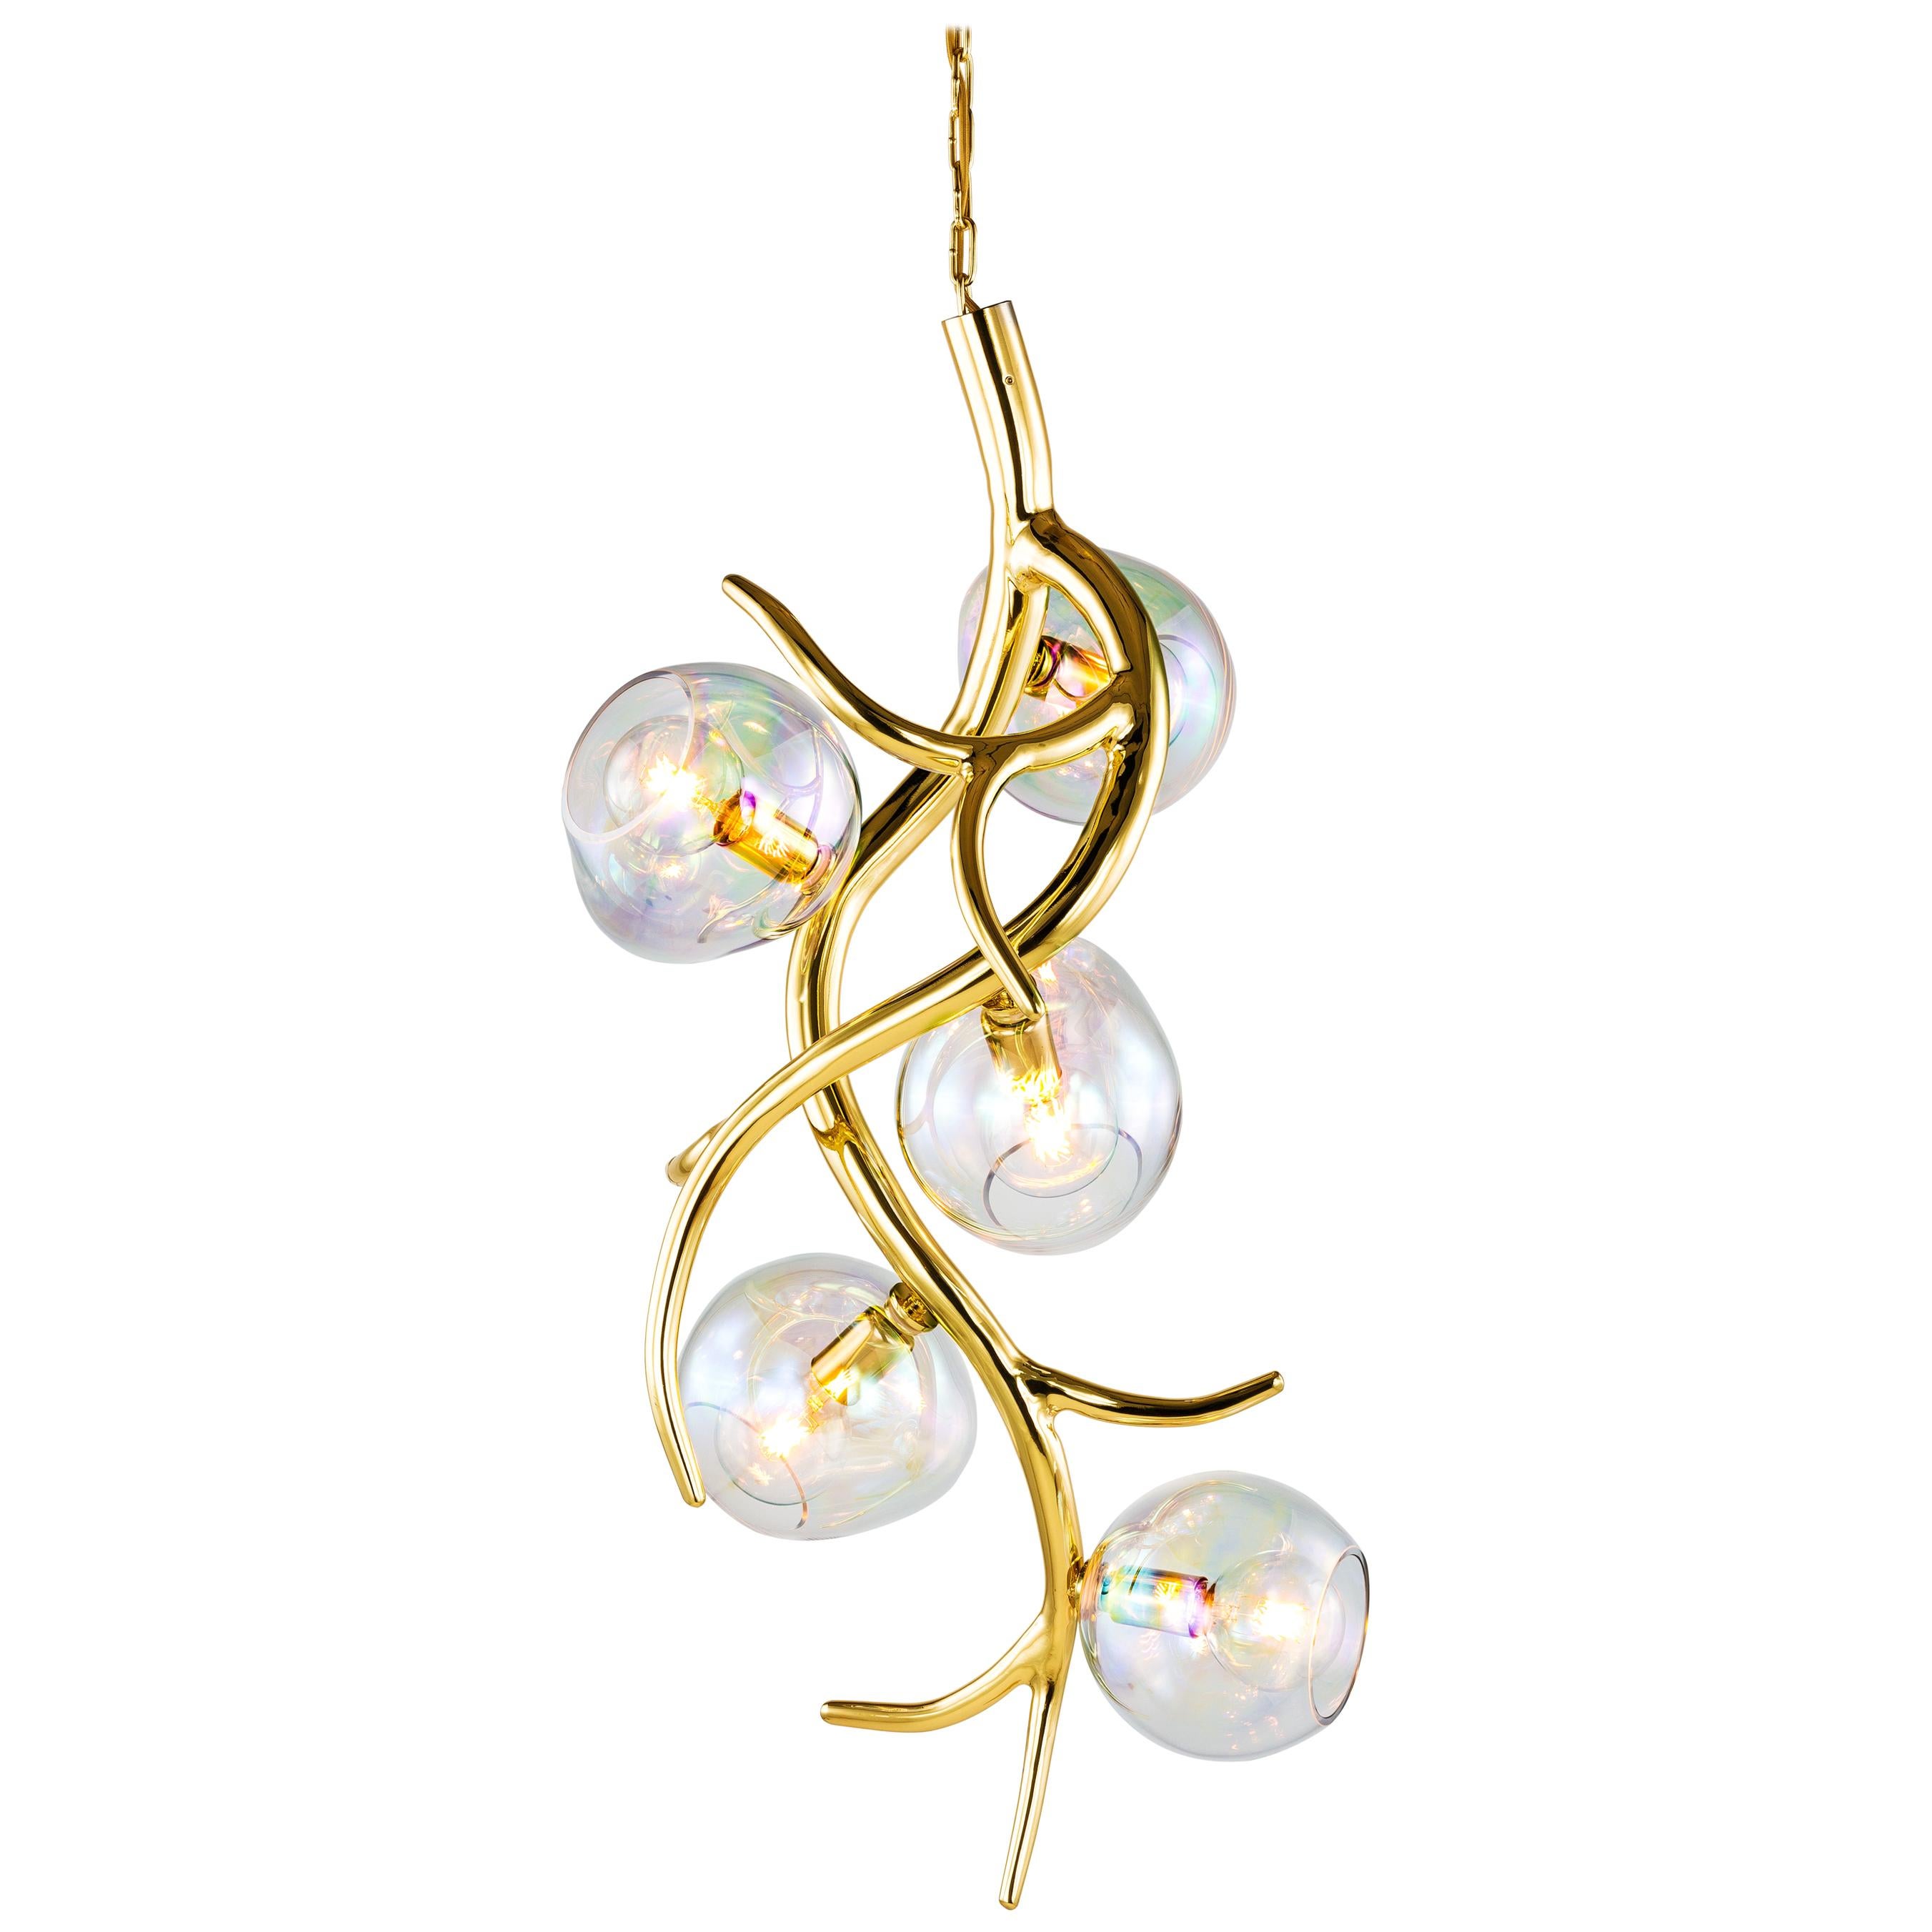 Modern Pendant with Colored Glass in a Brass Finish, Ersa Collection, by Brand For Sale